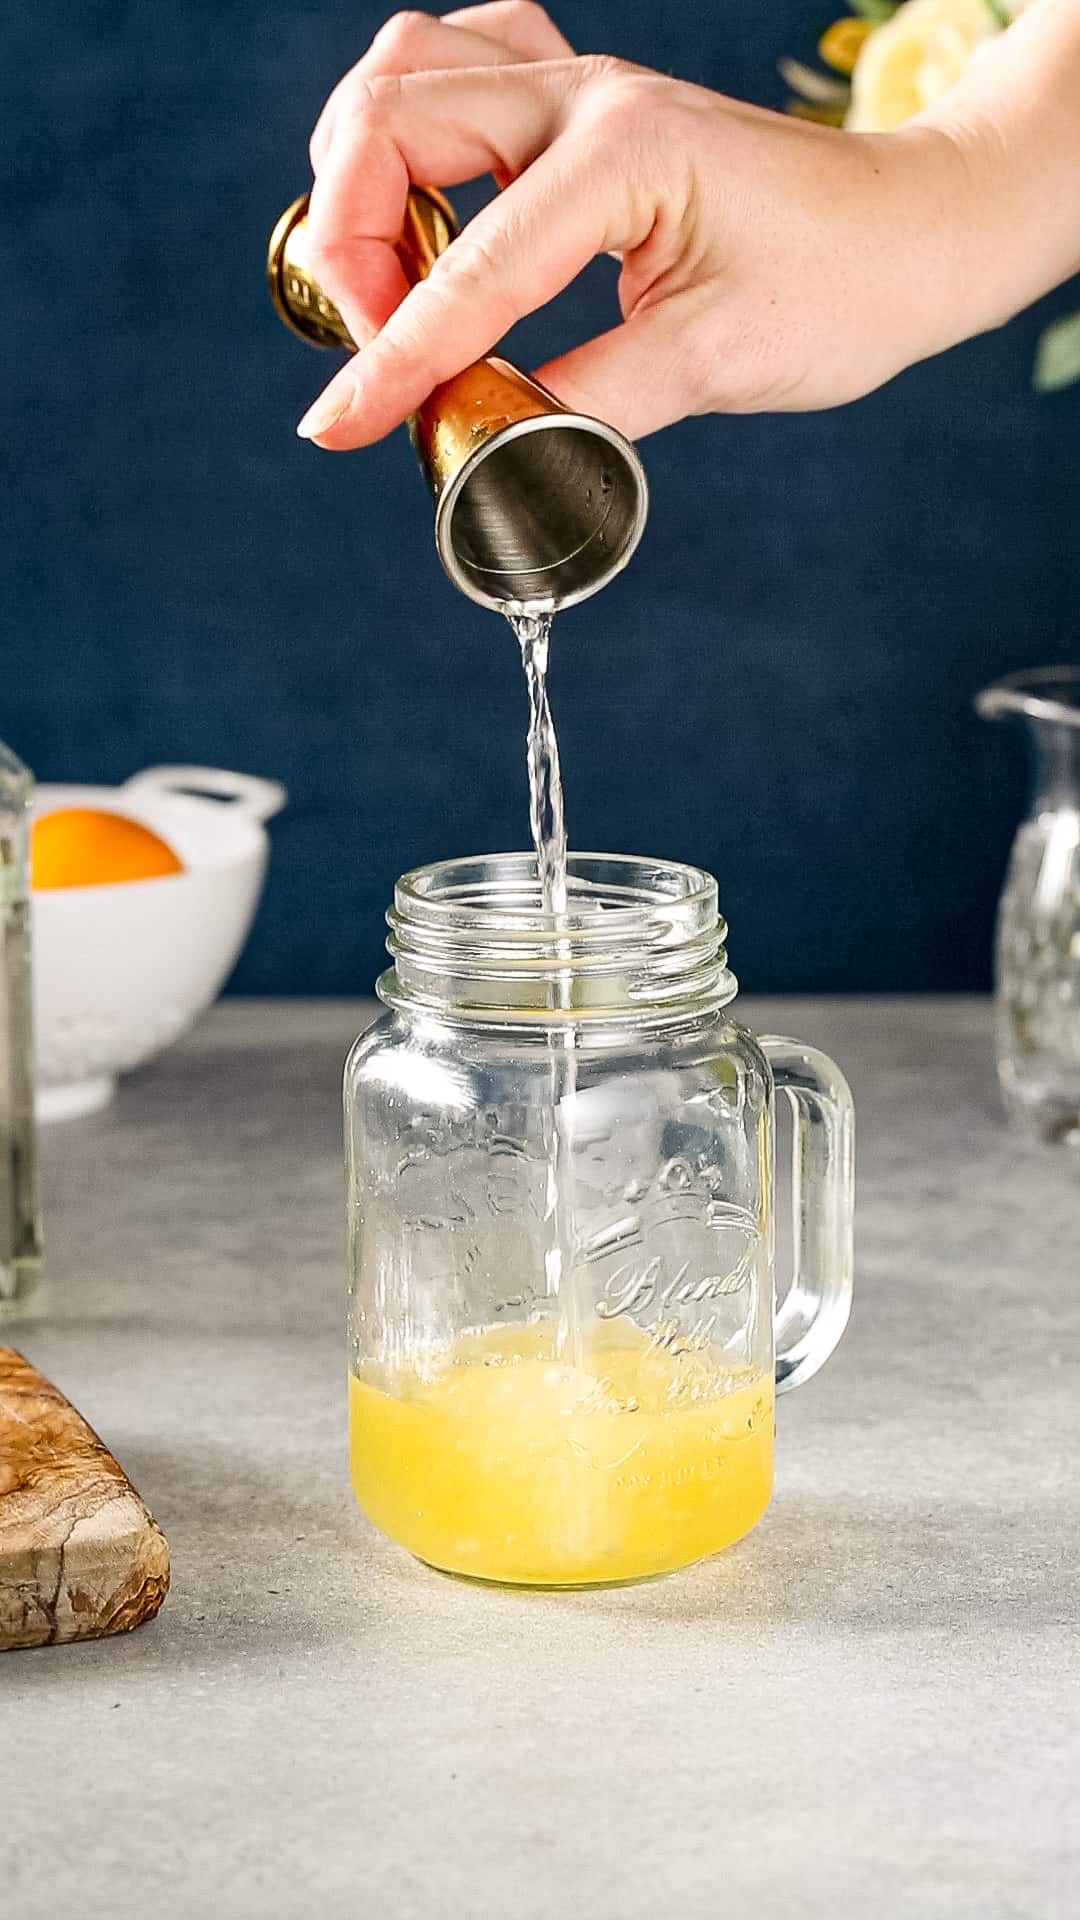 Hand using a gold jigger to pour water into a mason jar that has orange colored liquid in it.